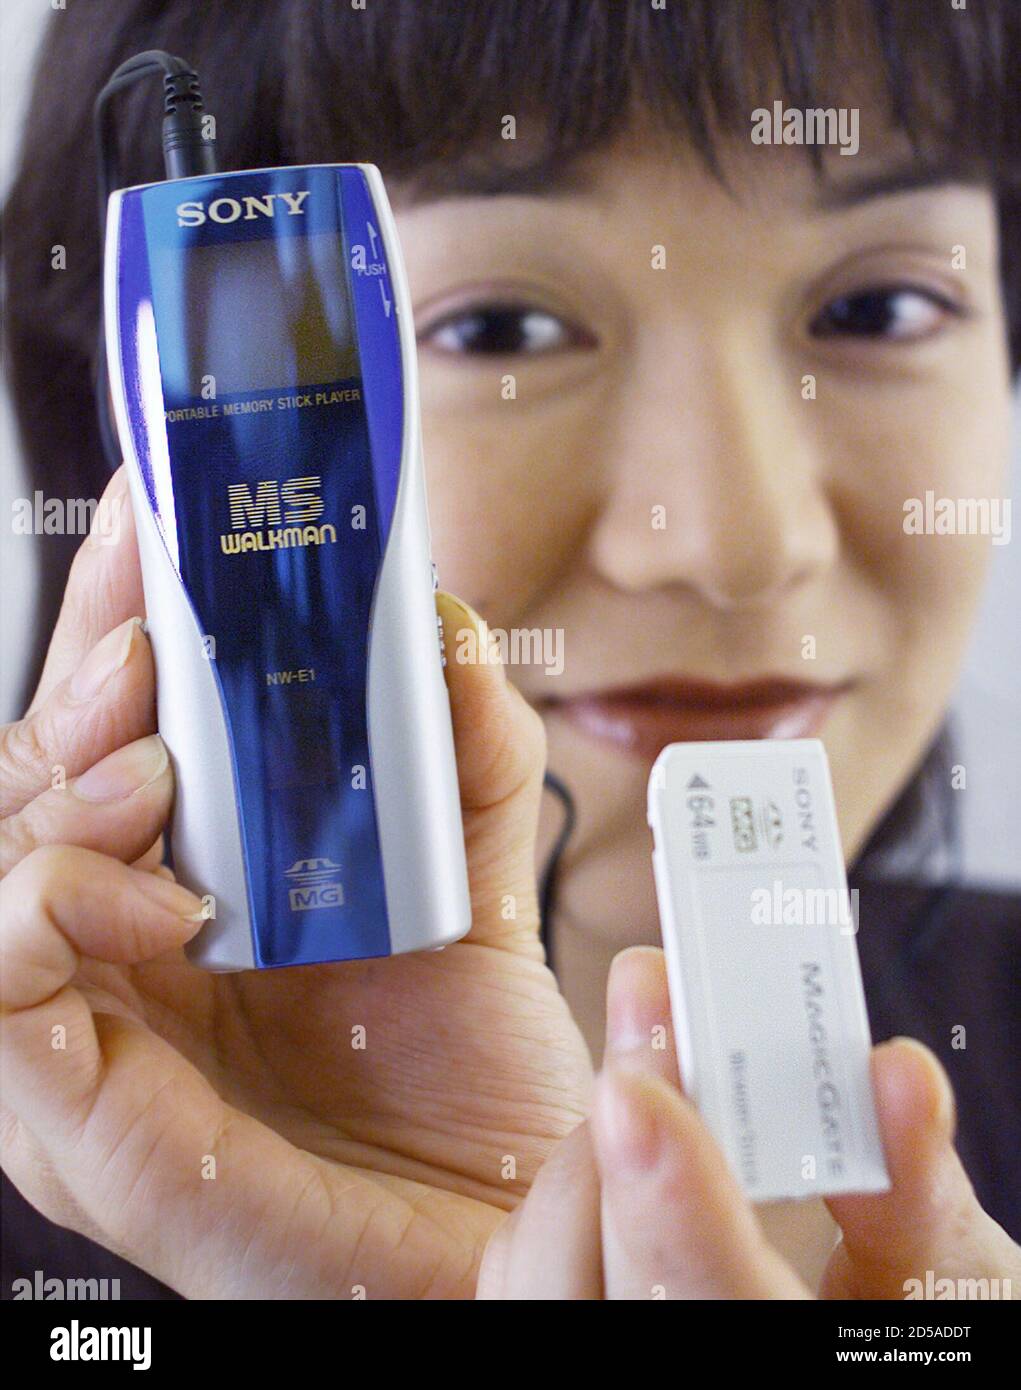 Sony Marketing's Fumie Kagaya shows off a "Memory Stick Walkman" portable audio player and "MagicGate Memory IC recording media at a Sony office in Tokyo September 28. Sony Corporation announced plans